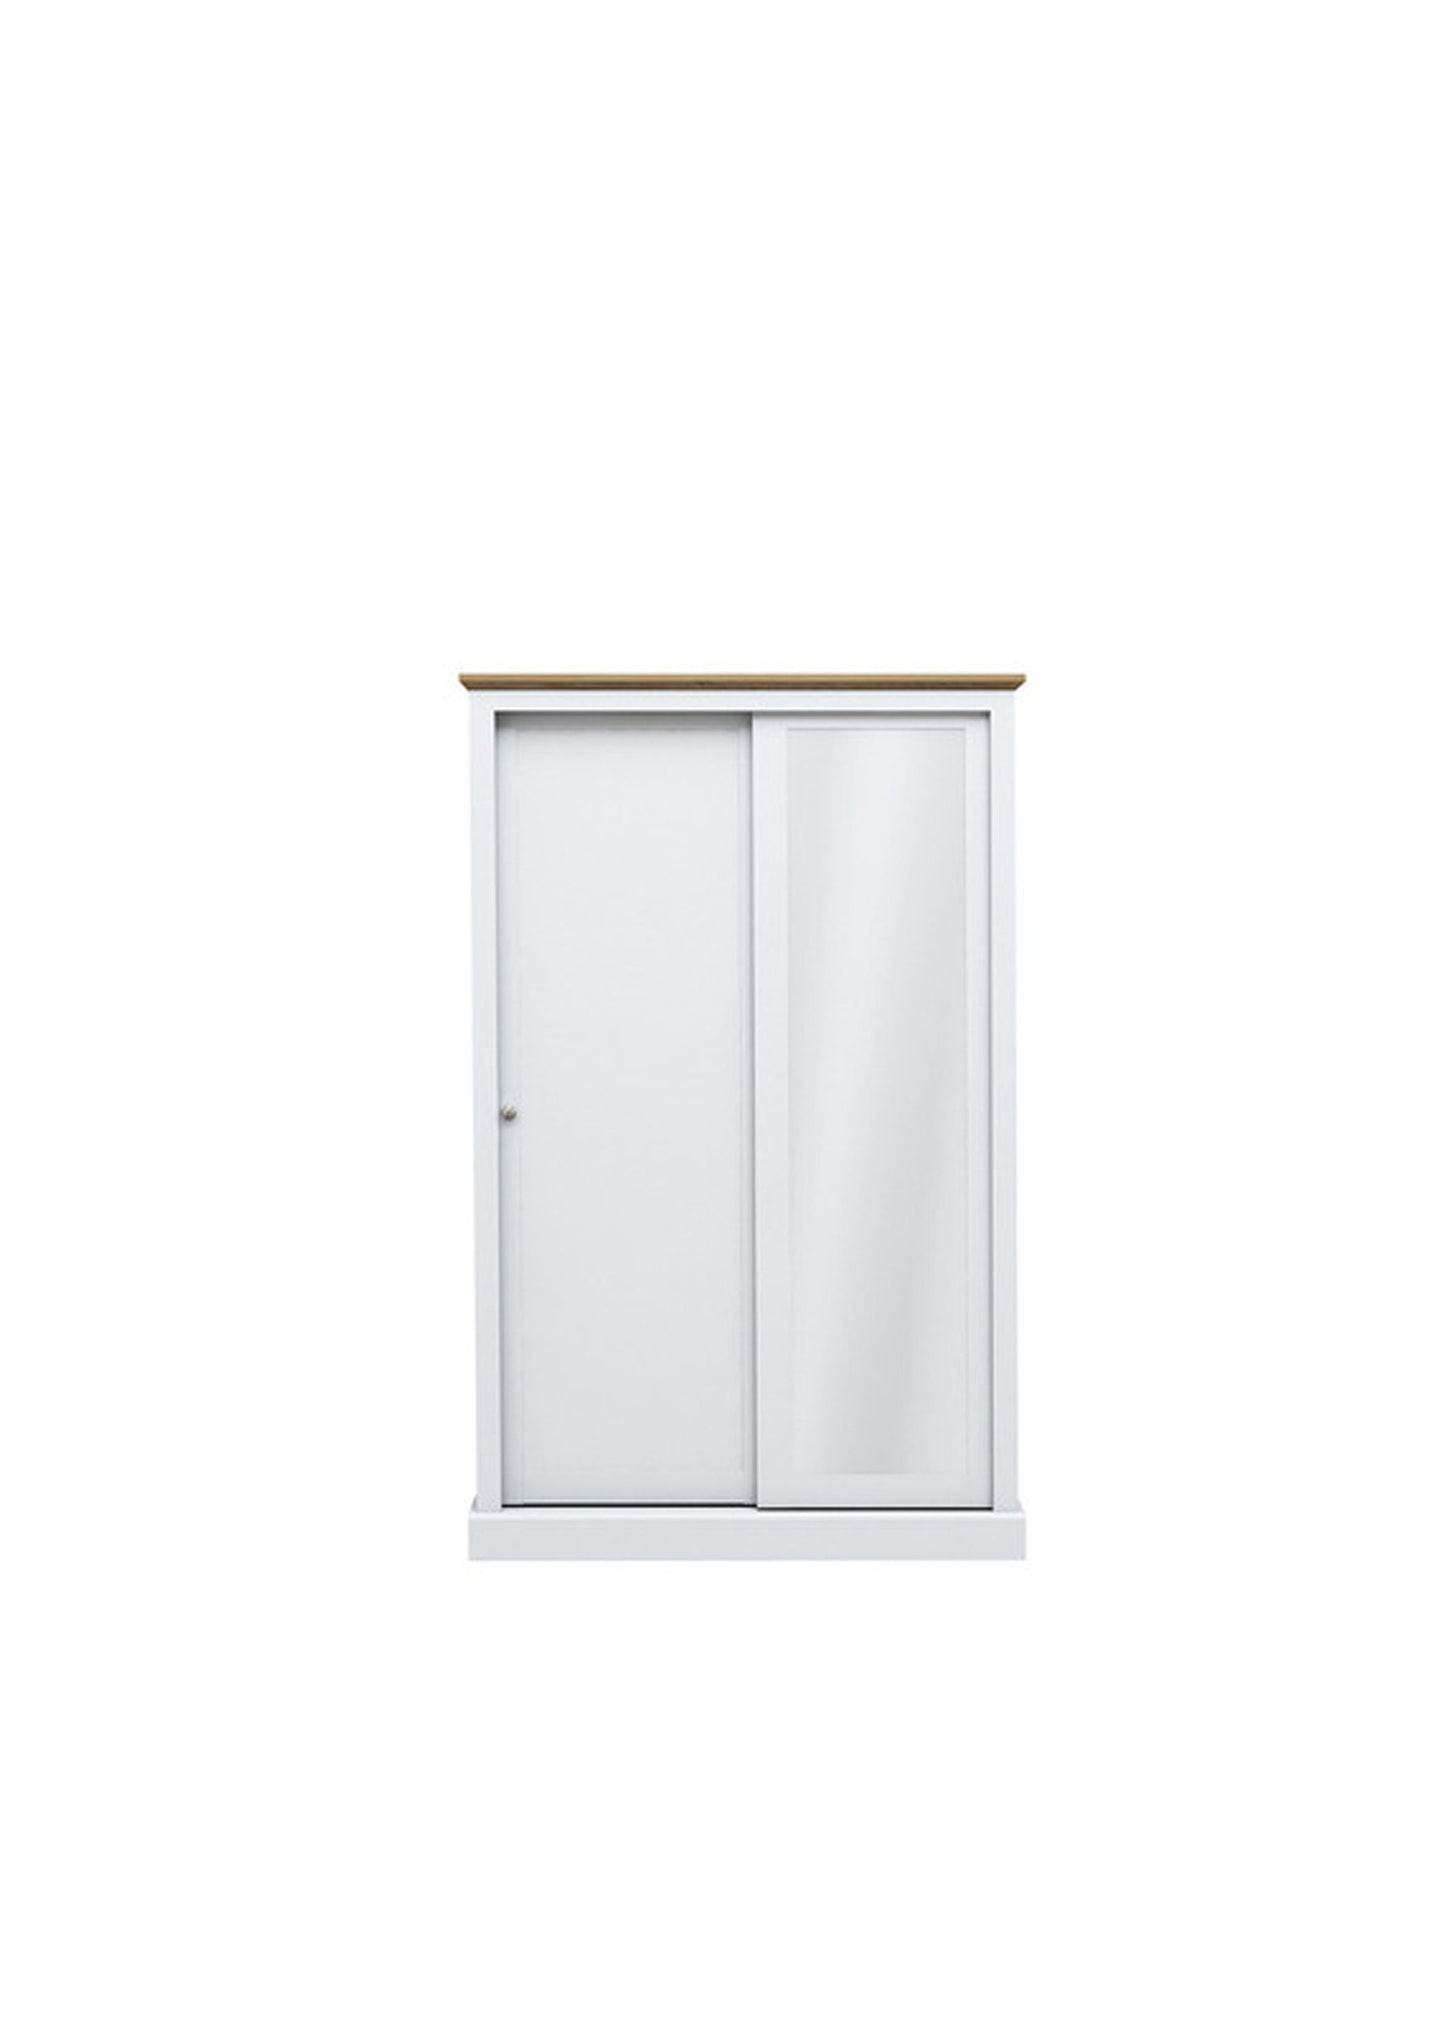 Wooden Sliding Wardrobe In White With 2 Doors and Mirror